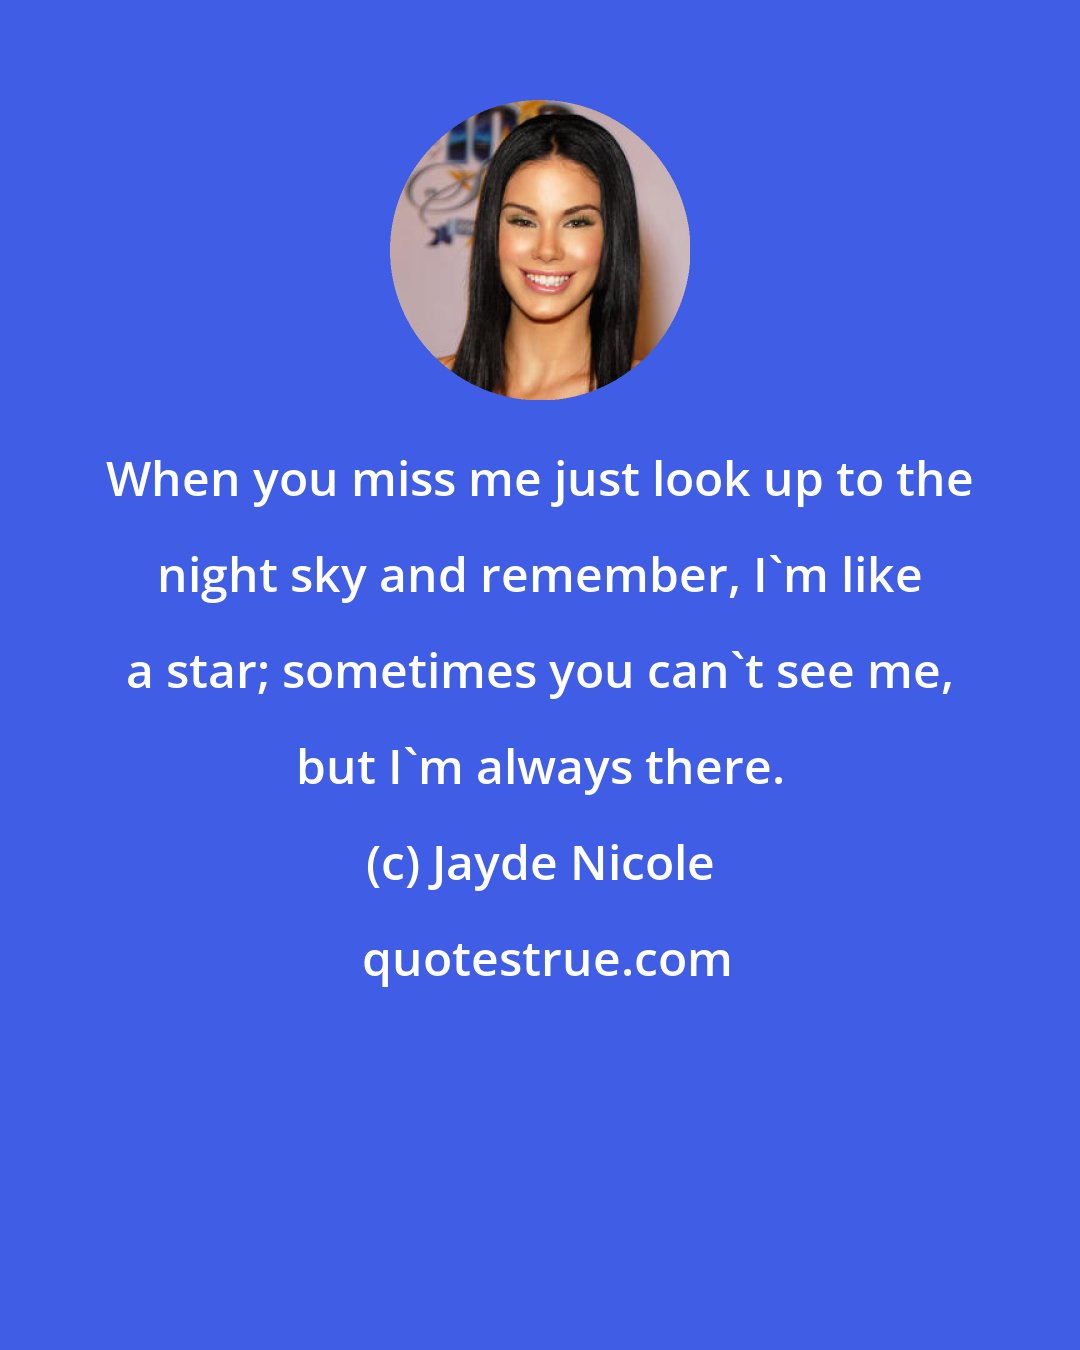 Jayde Nicole: When you miss me just look up to the night sky and remember, I'm like a star; sometimes you can't see me, but I'm always there.